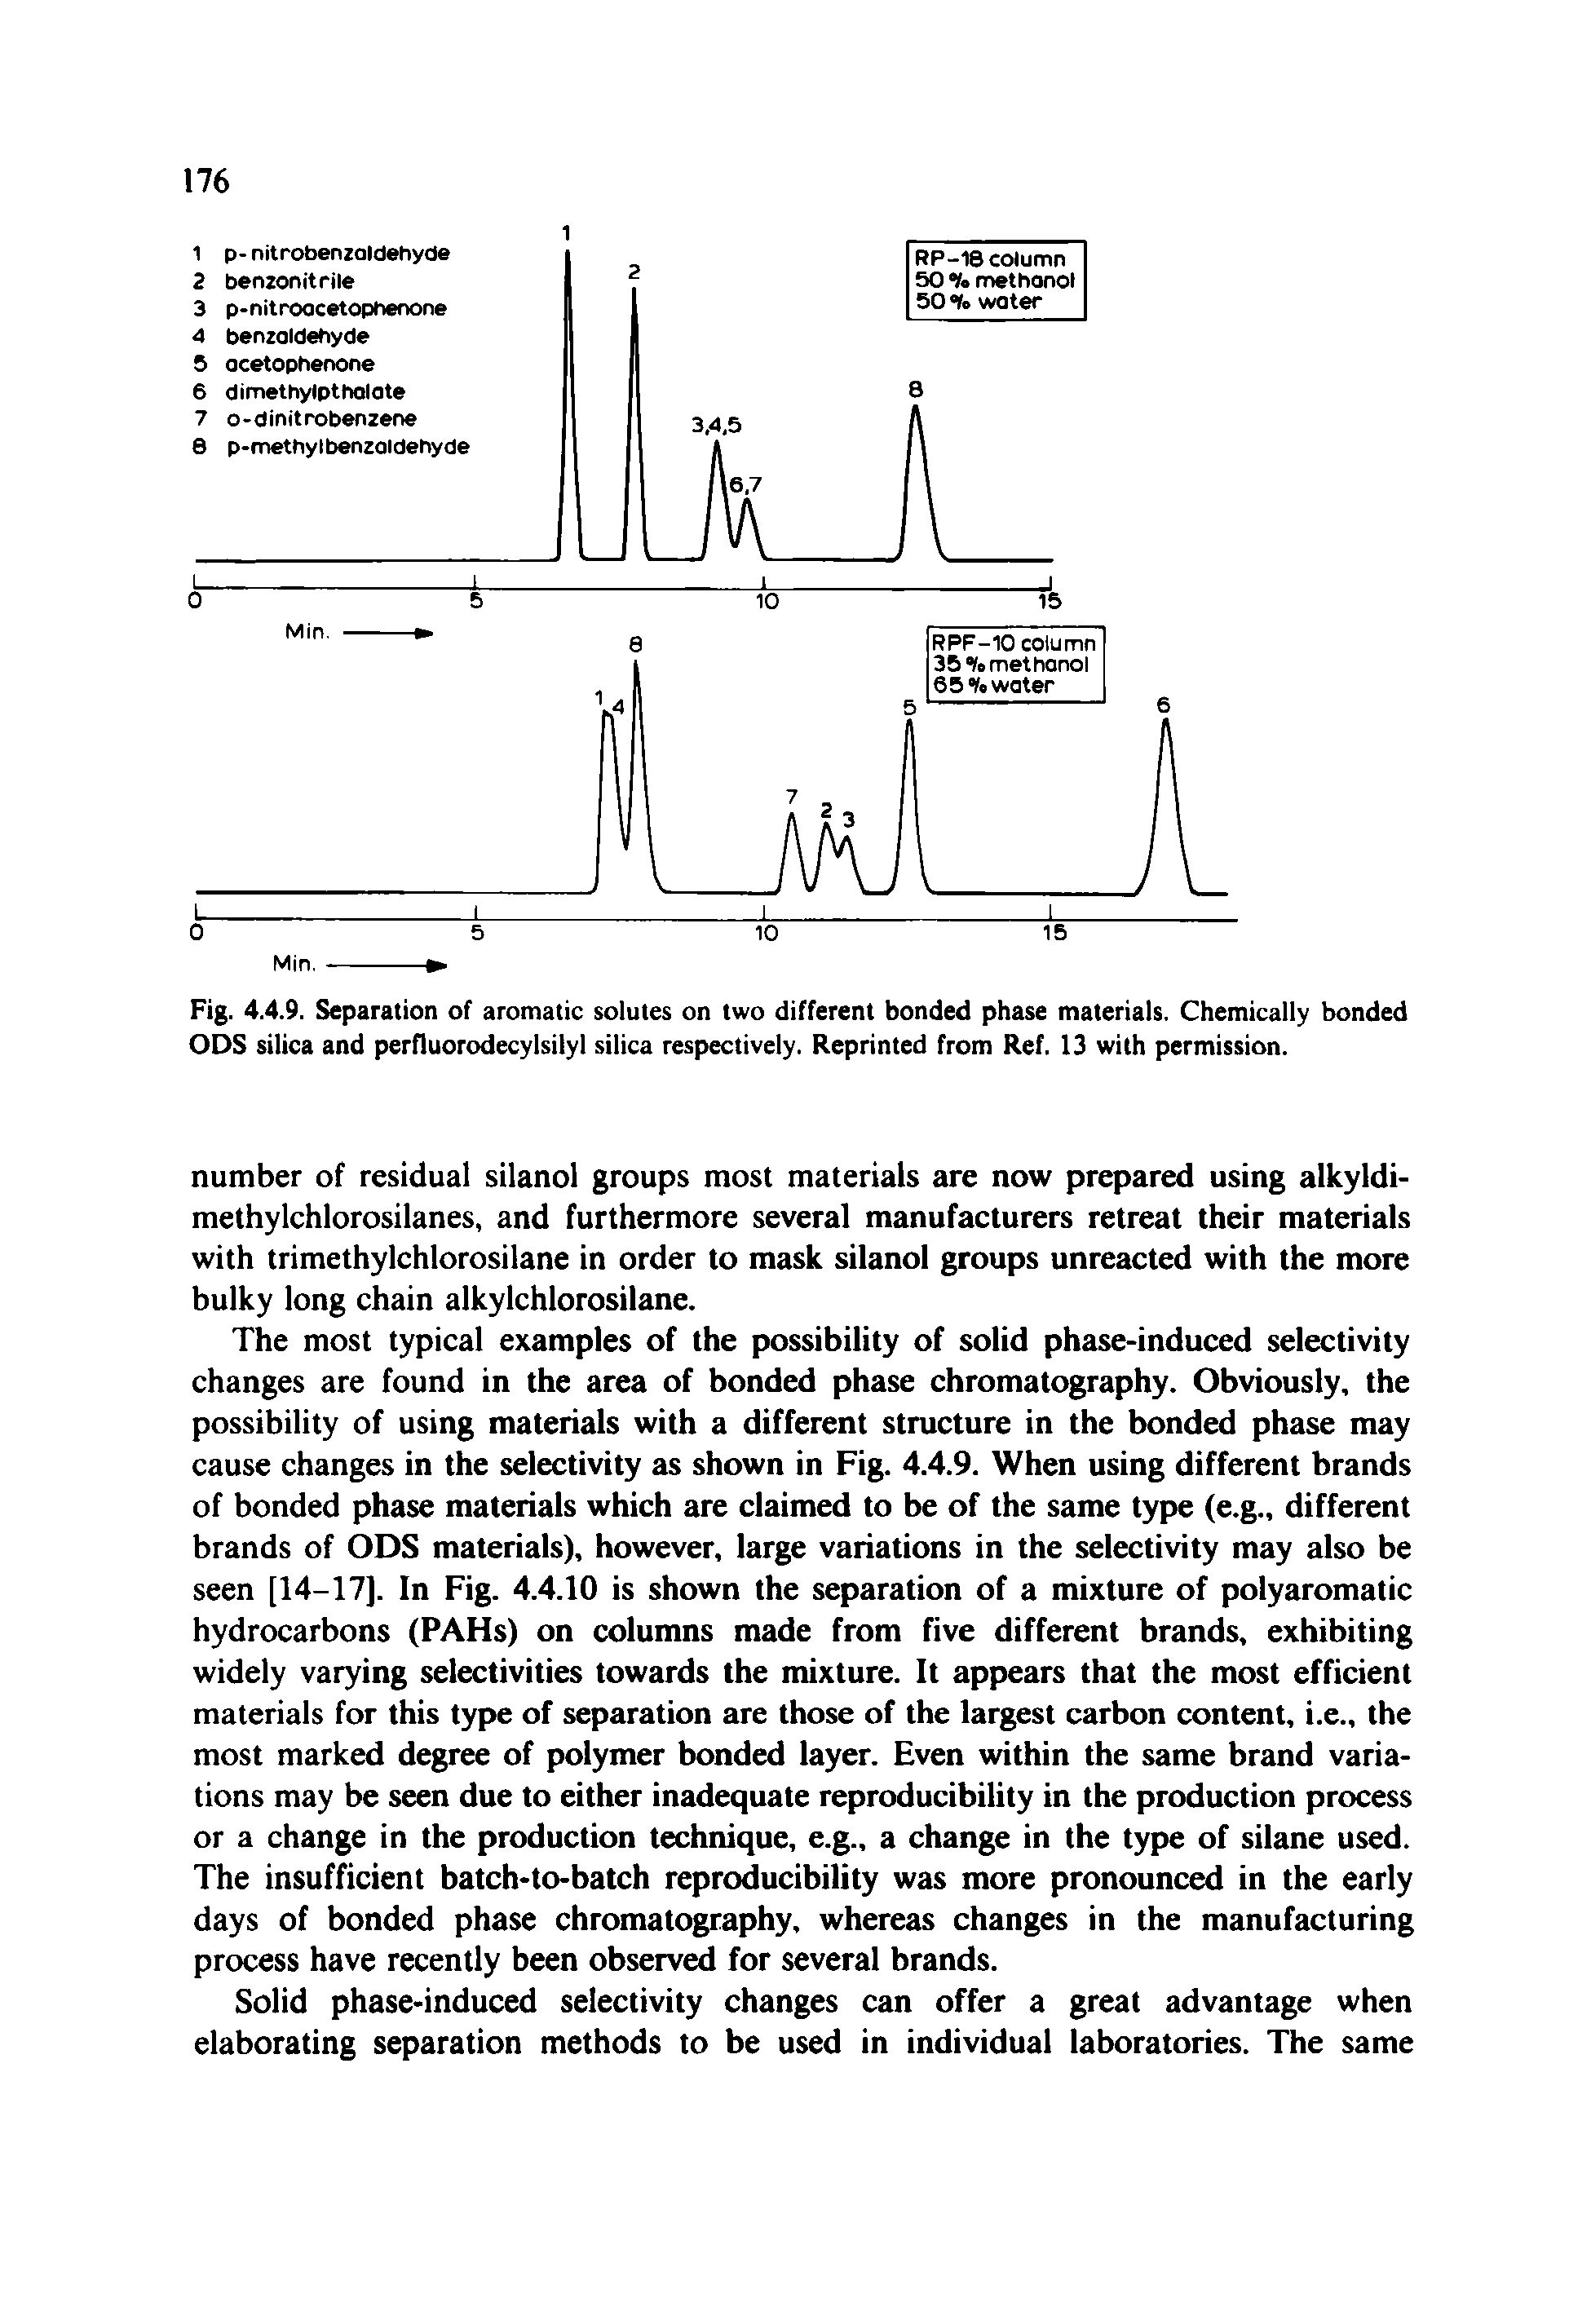 Fig. 4.4.9. Separation of aromatic solutes on two different bonded phase materials. Chemically bonded ODS silica and perfluorodecylsilyl silica respectively. Reprinted from Ref. 13 with permission.